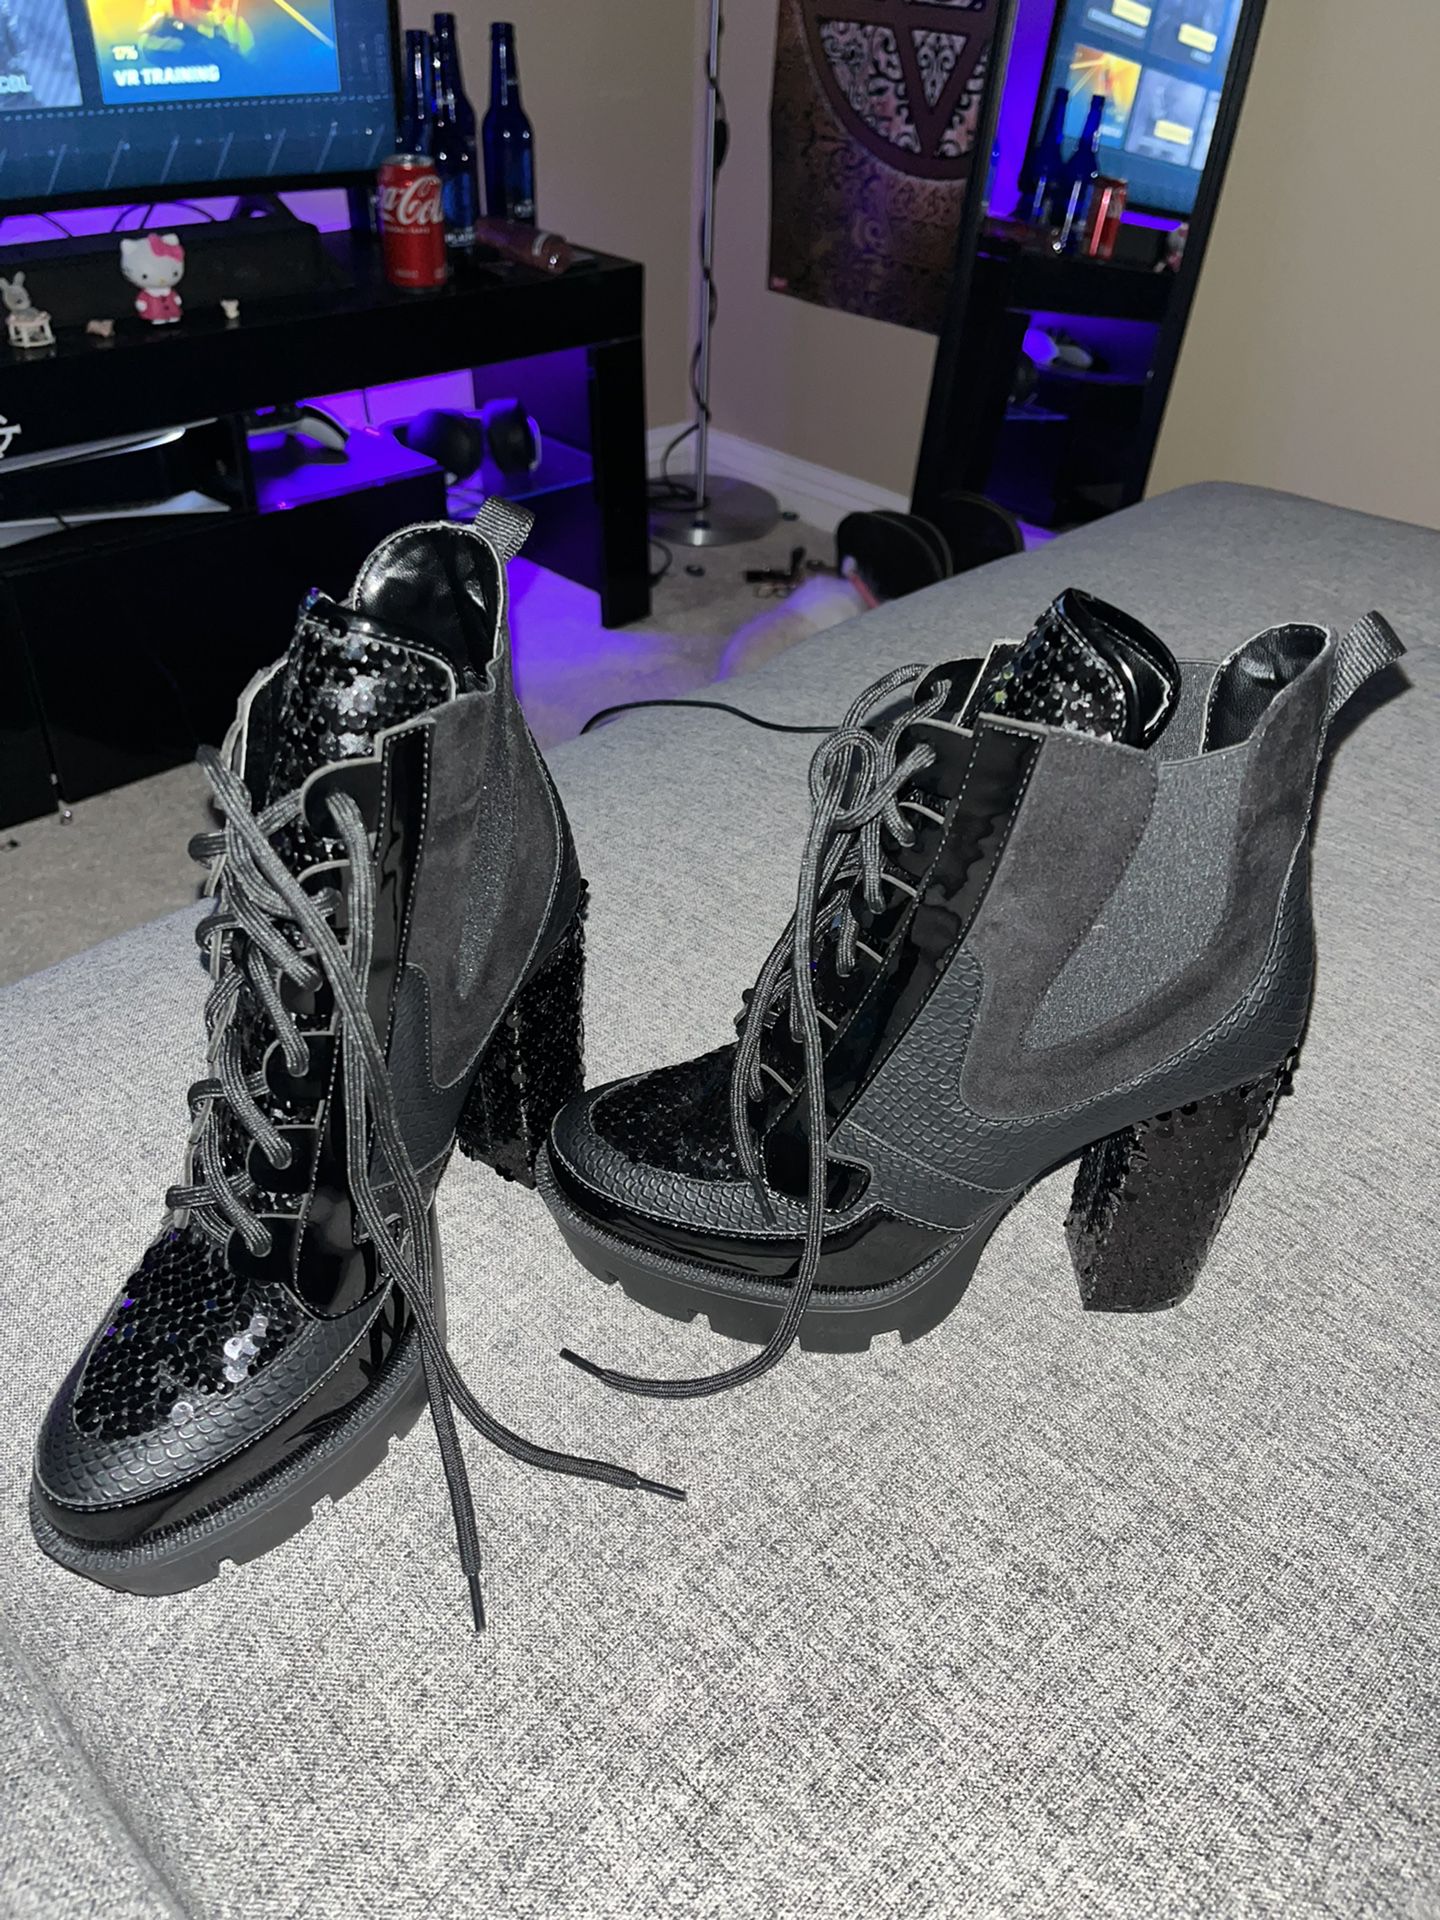 size 7 black sequence boot heels